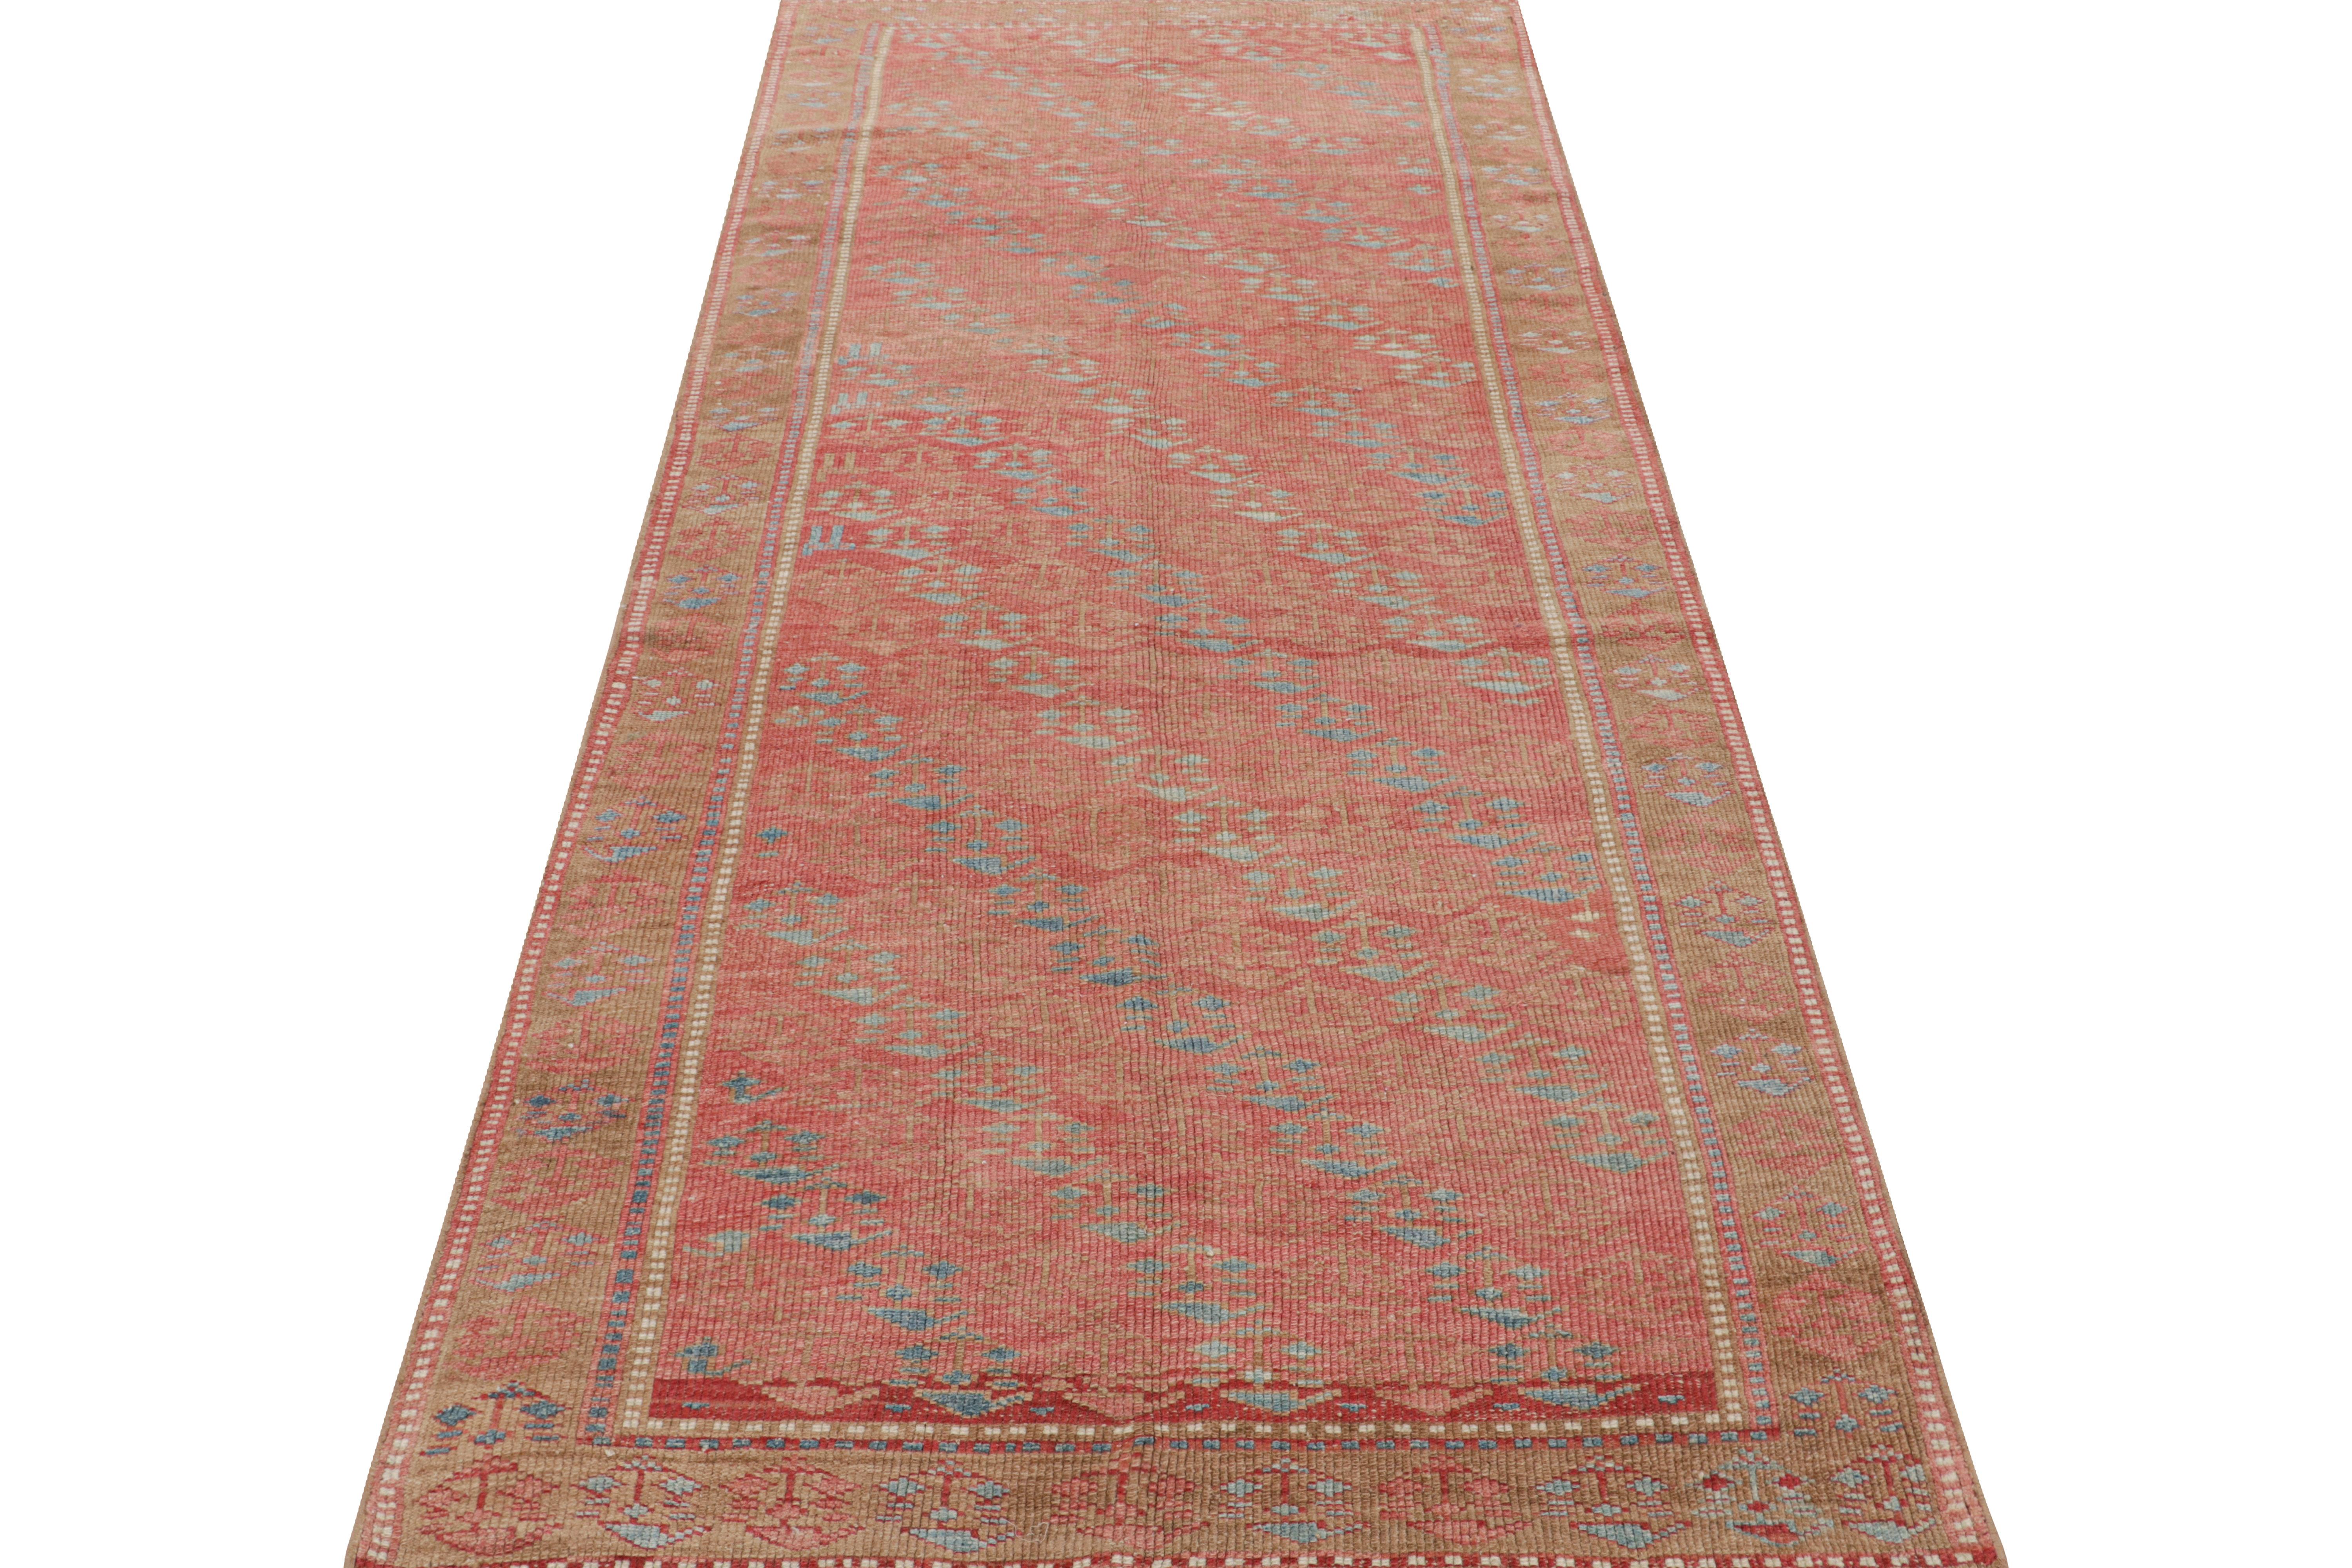 Tribal Vintage Kurdish Runner Rug in Red with Geometric Patterns, from Rug & Kilim For Sale